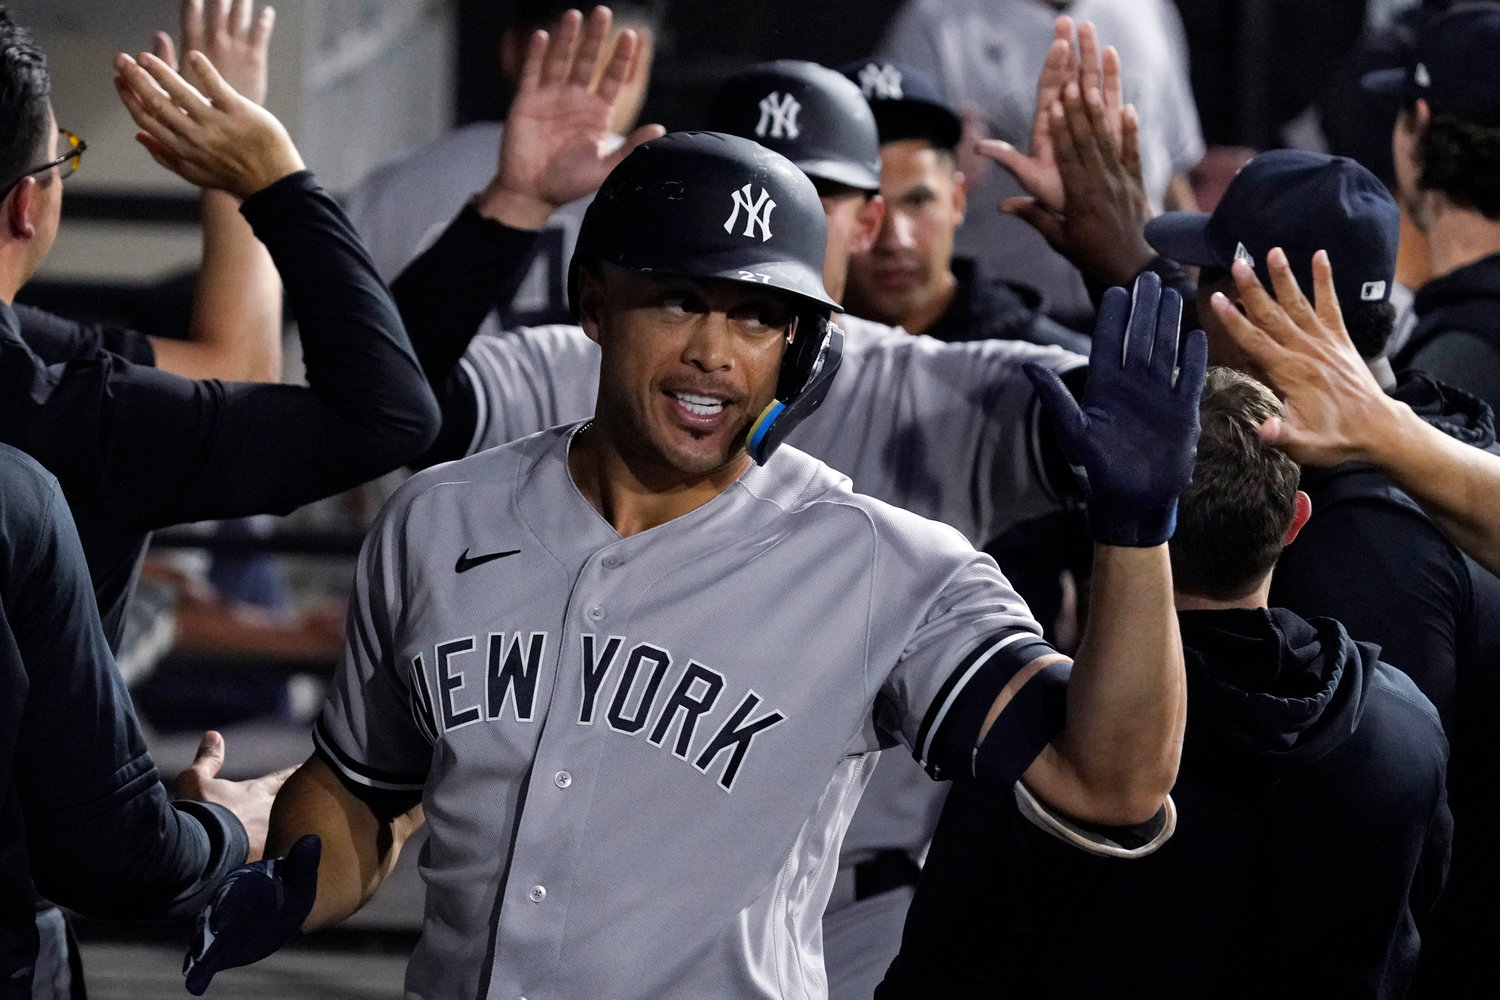 New York Yankees slugger Giancarlo Stanton is congratulated after his two-run home run against the Chicago White Sox during the third inning in Chicago on Thursday night.